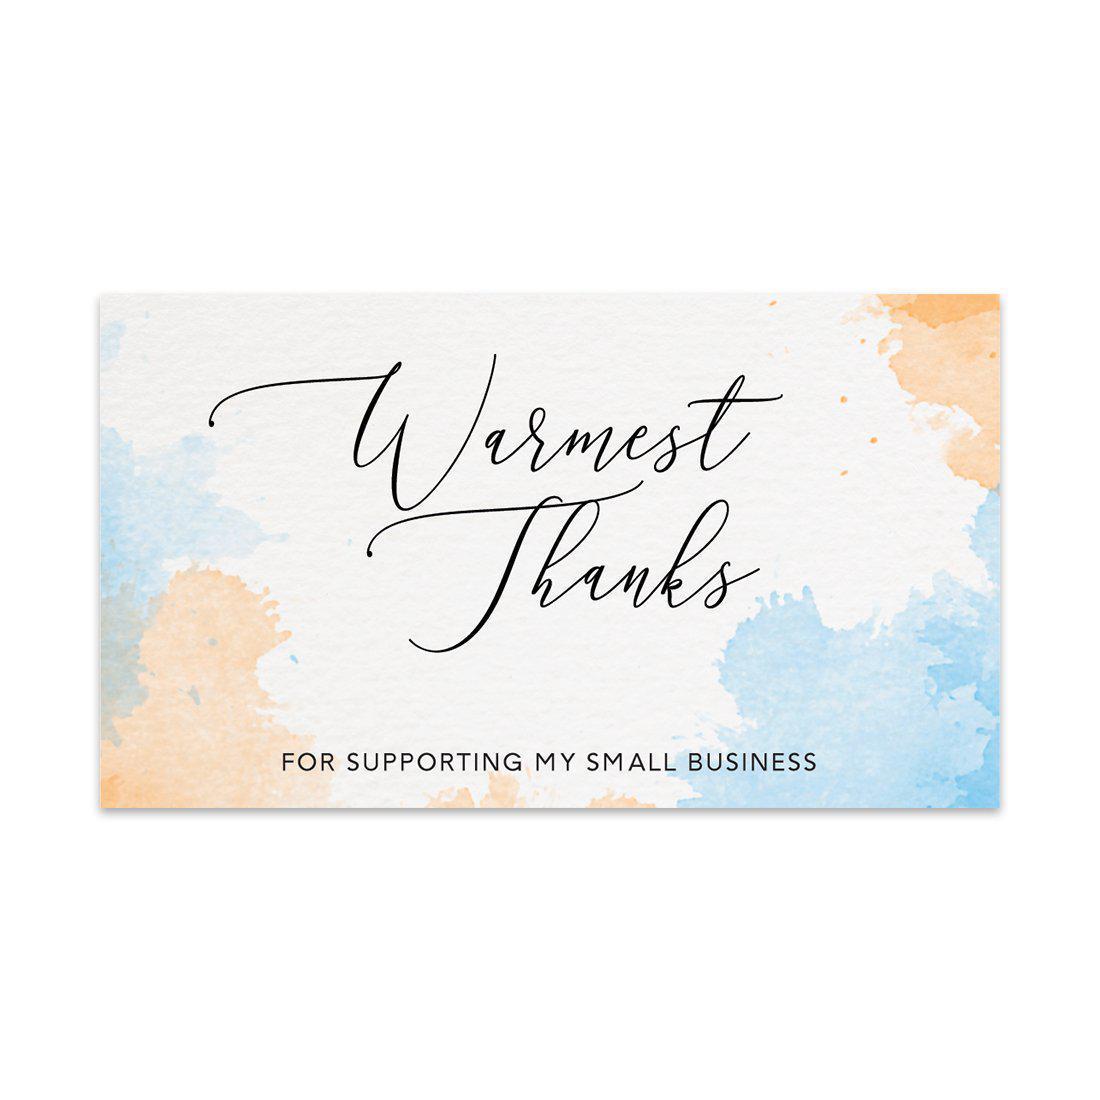 Thank you card design, Letterpress business cards, Small business